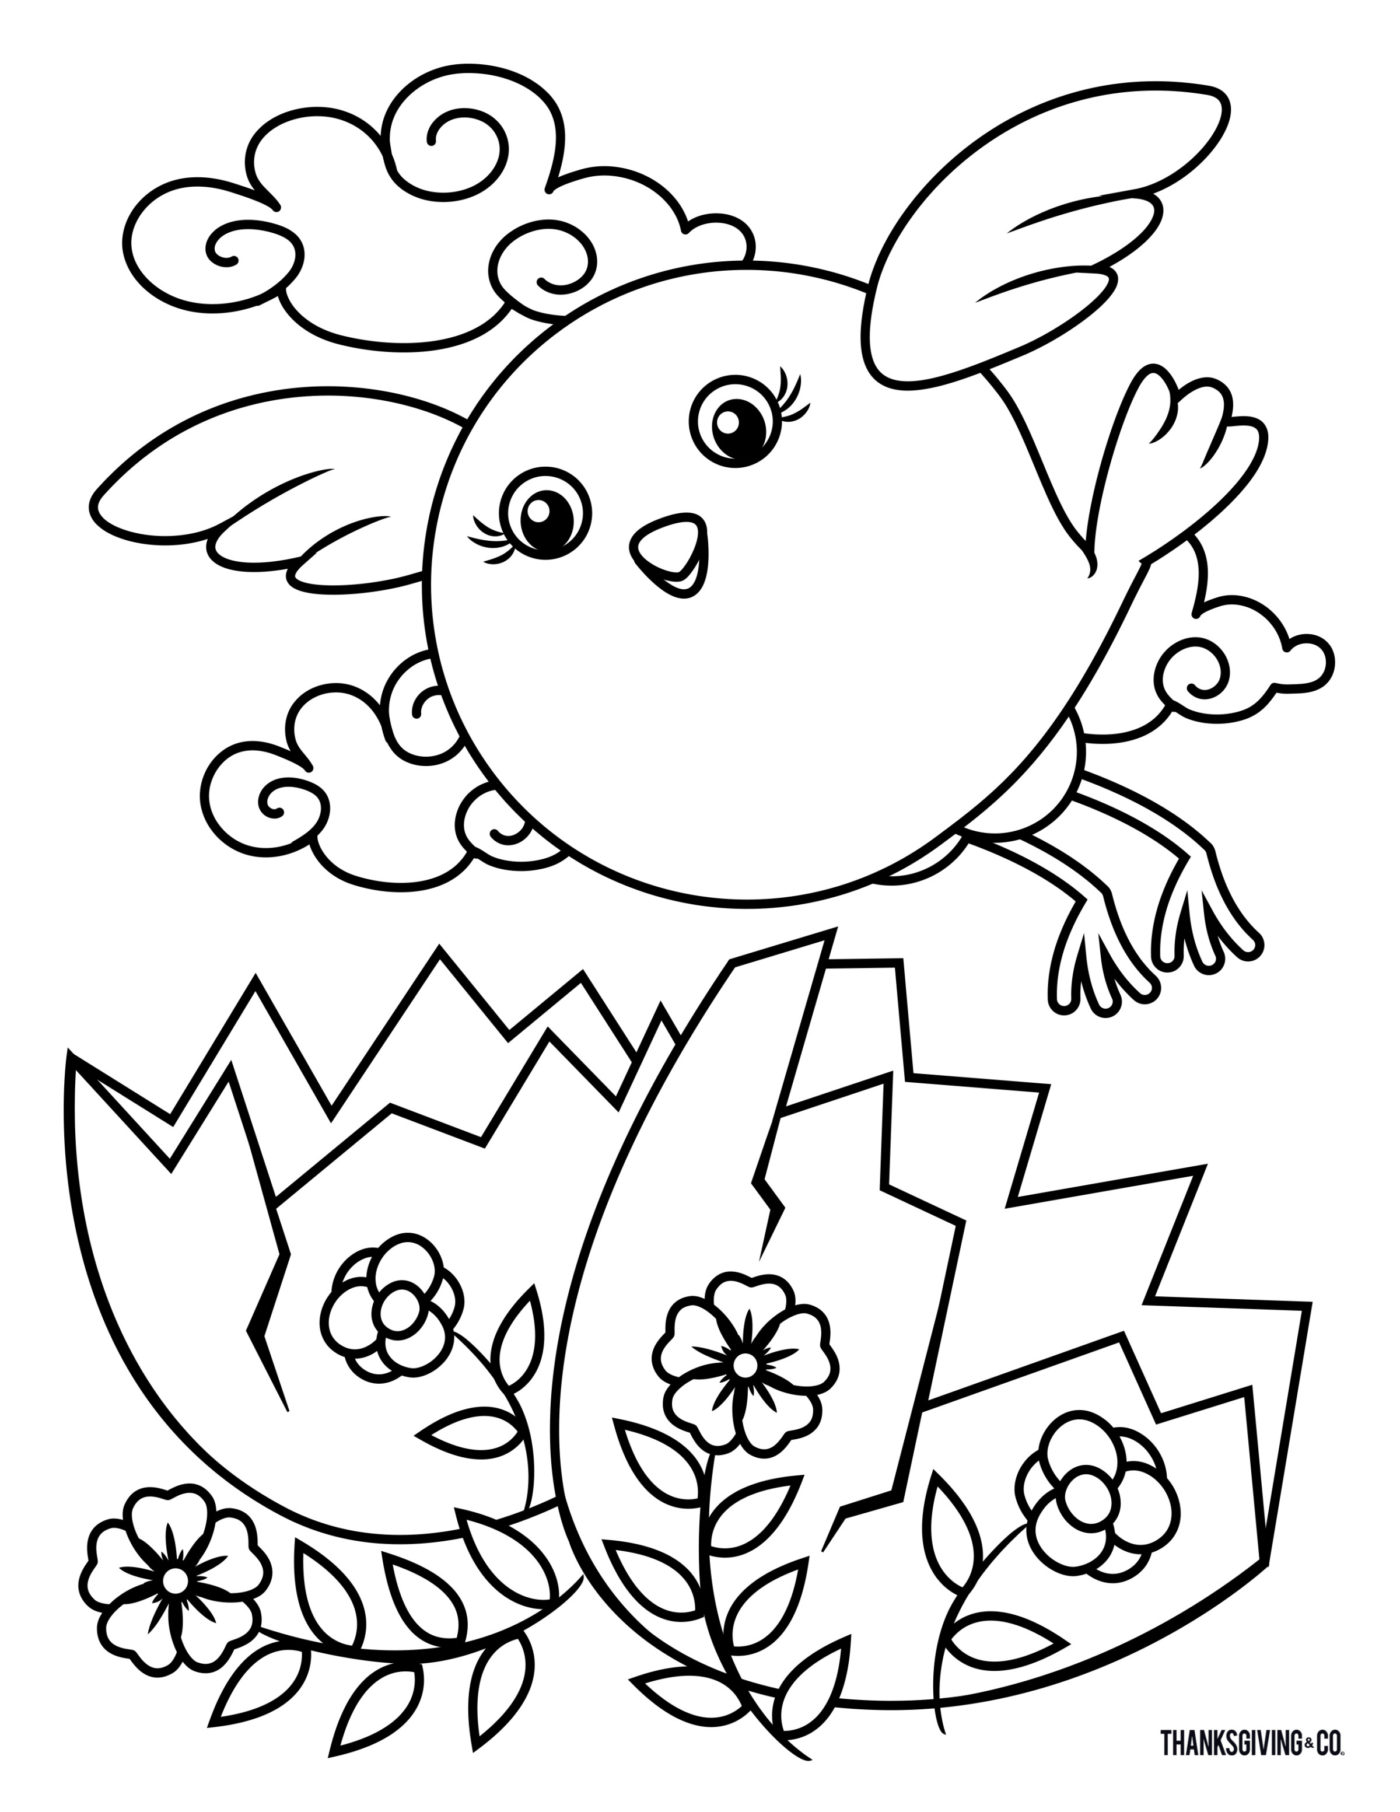 Fun Easter Coloring Pages Coloring Pages